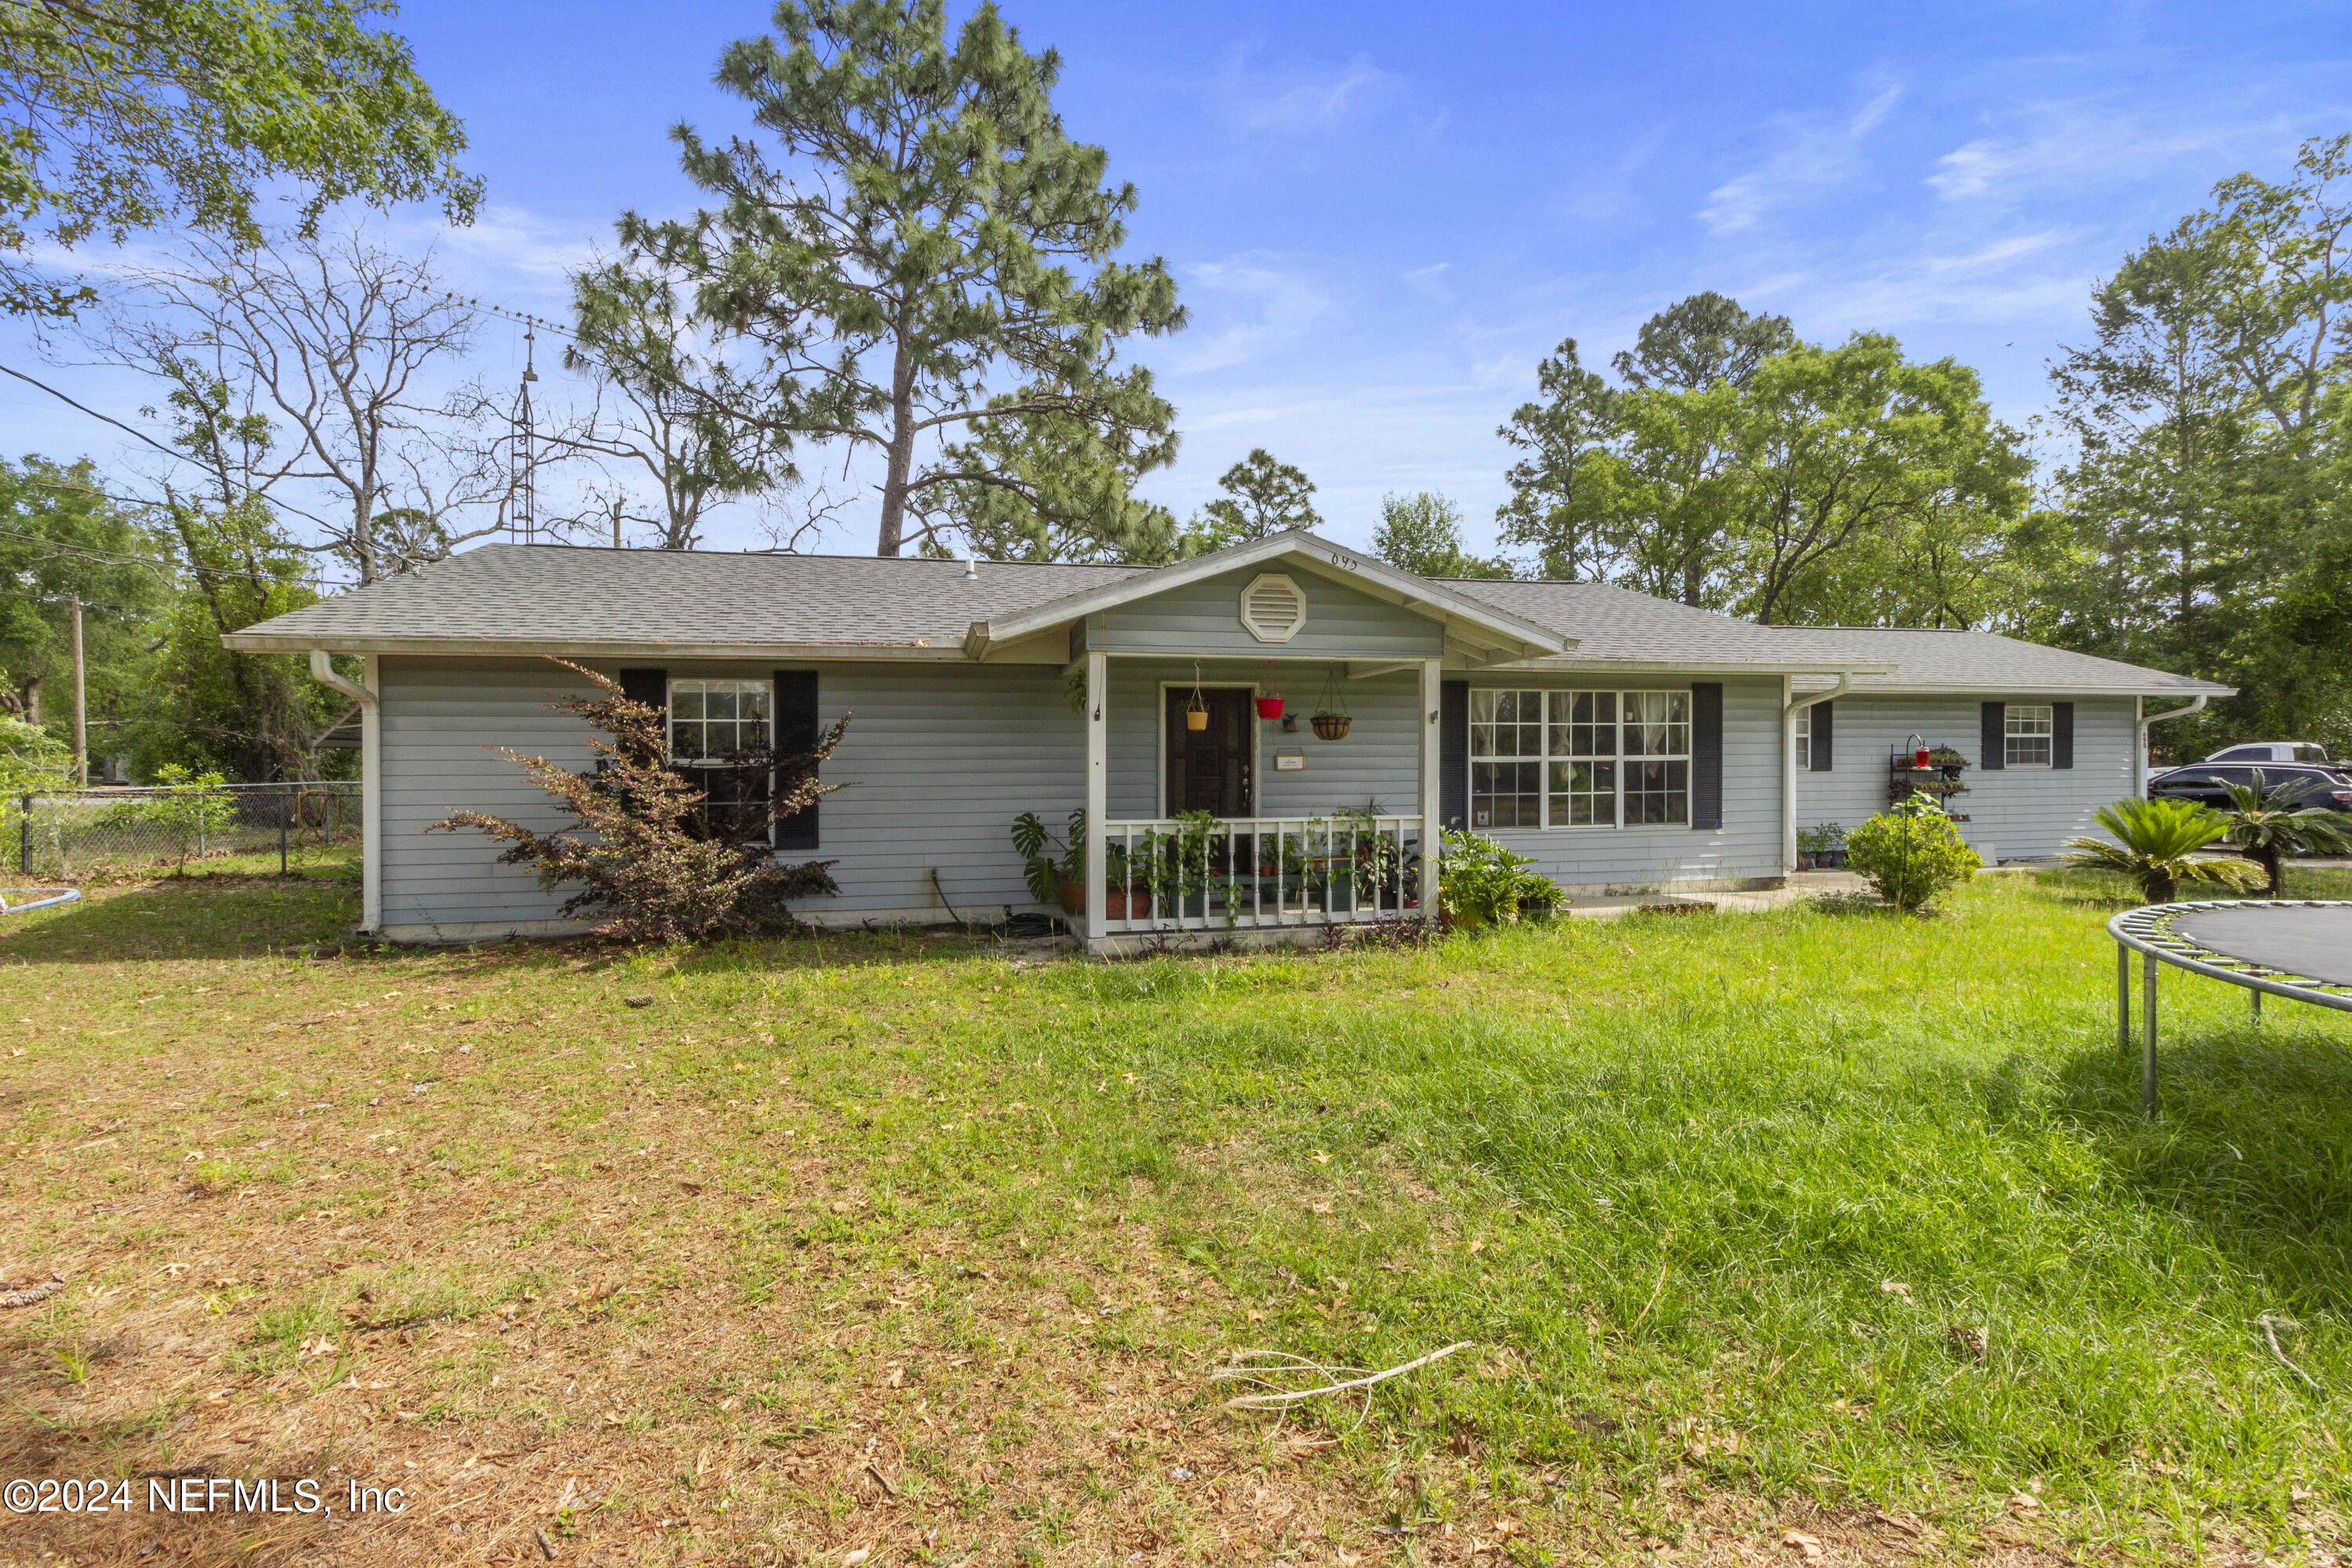 Keystone Heights, FL home for sale located at 695 SE 41st Street, Keystone Heights, FL 32656